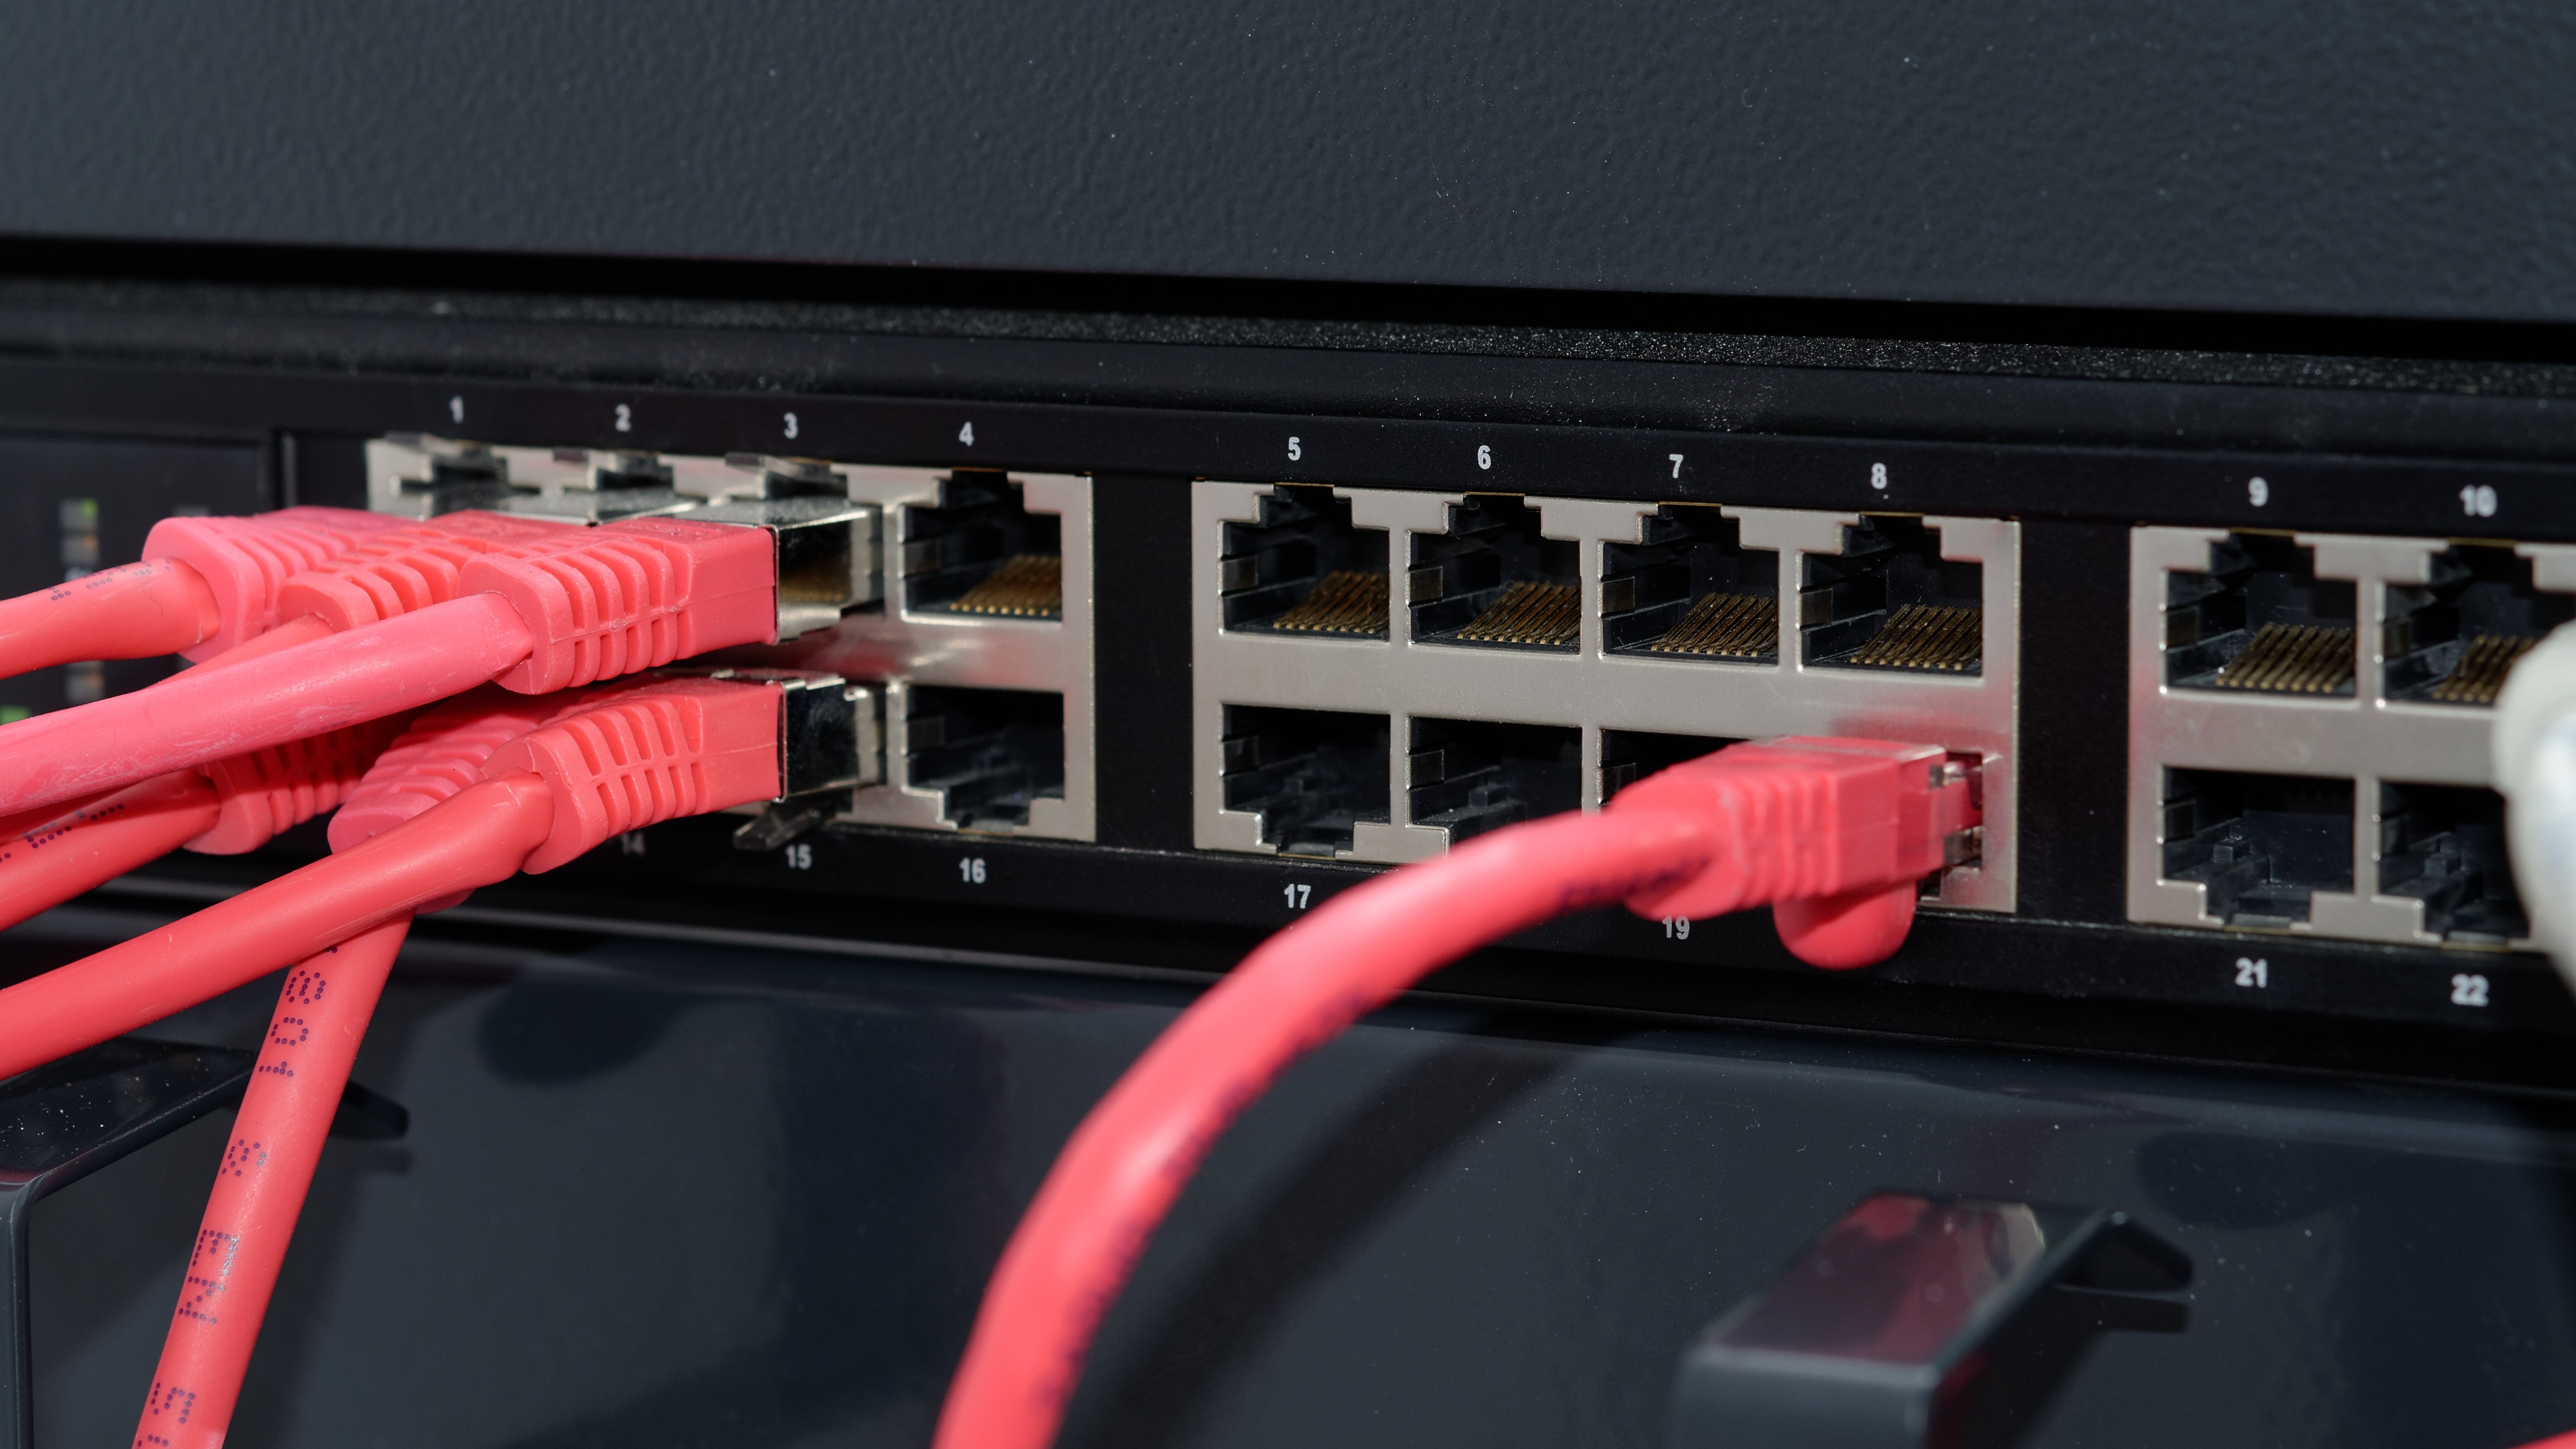 5 Best Network Switches For Expanding Connectivity Images